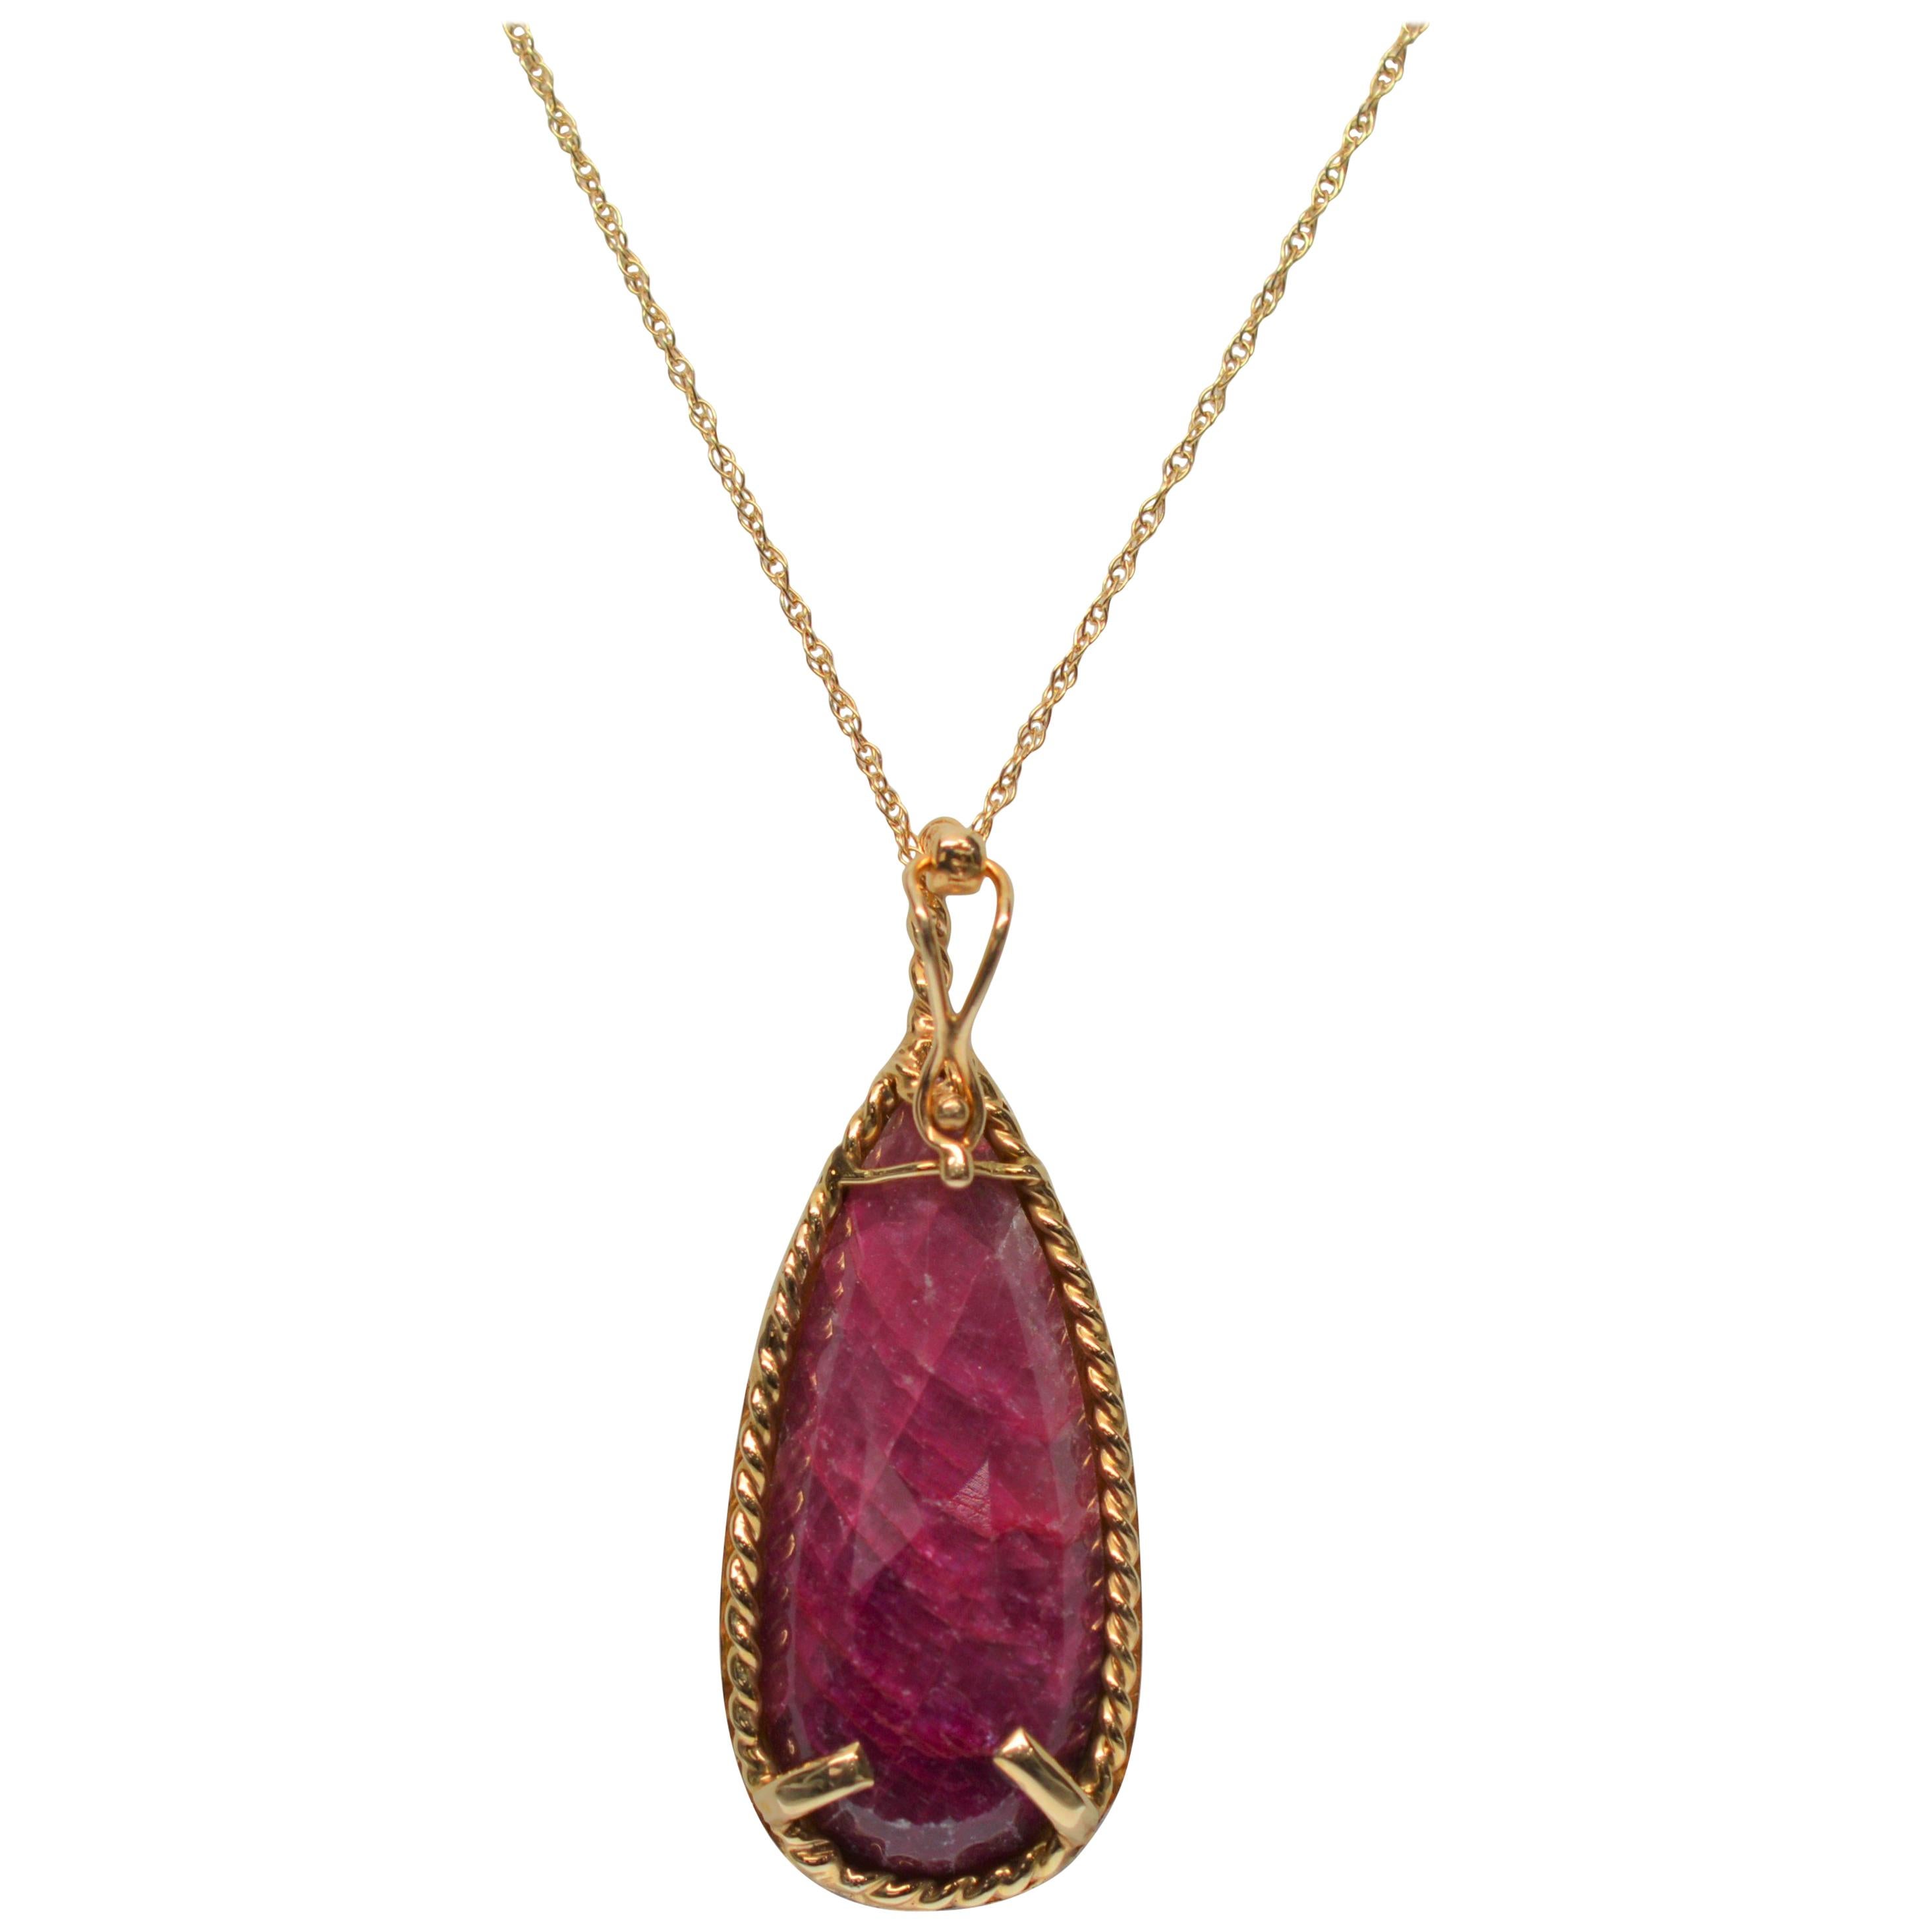 60 Carat Natural Ruby Pendant on 14K Yellow Gold Necklace 